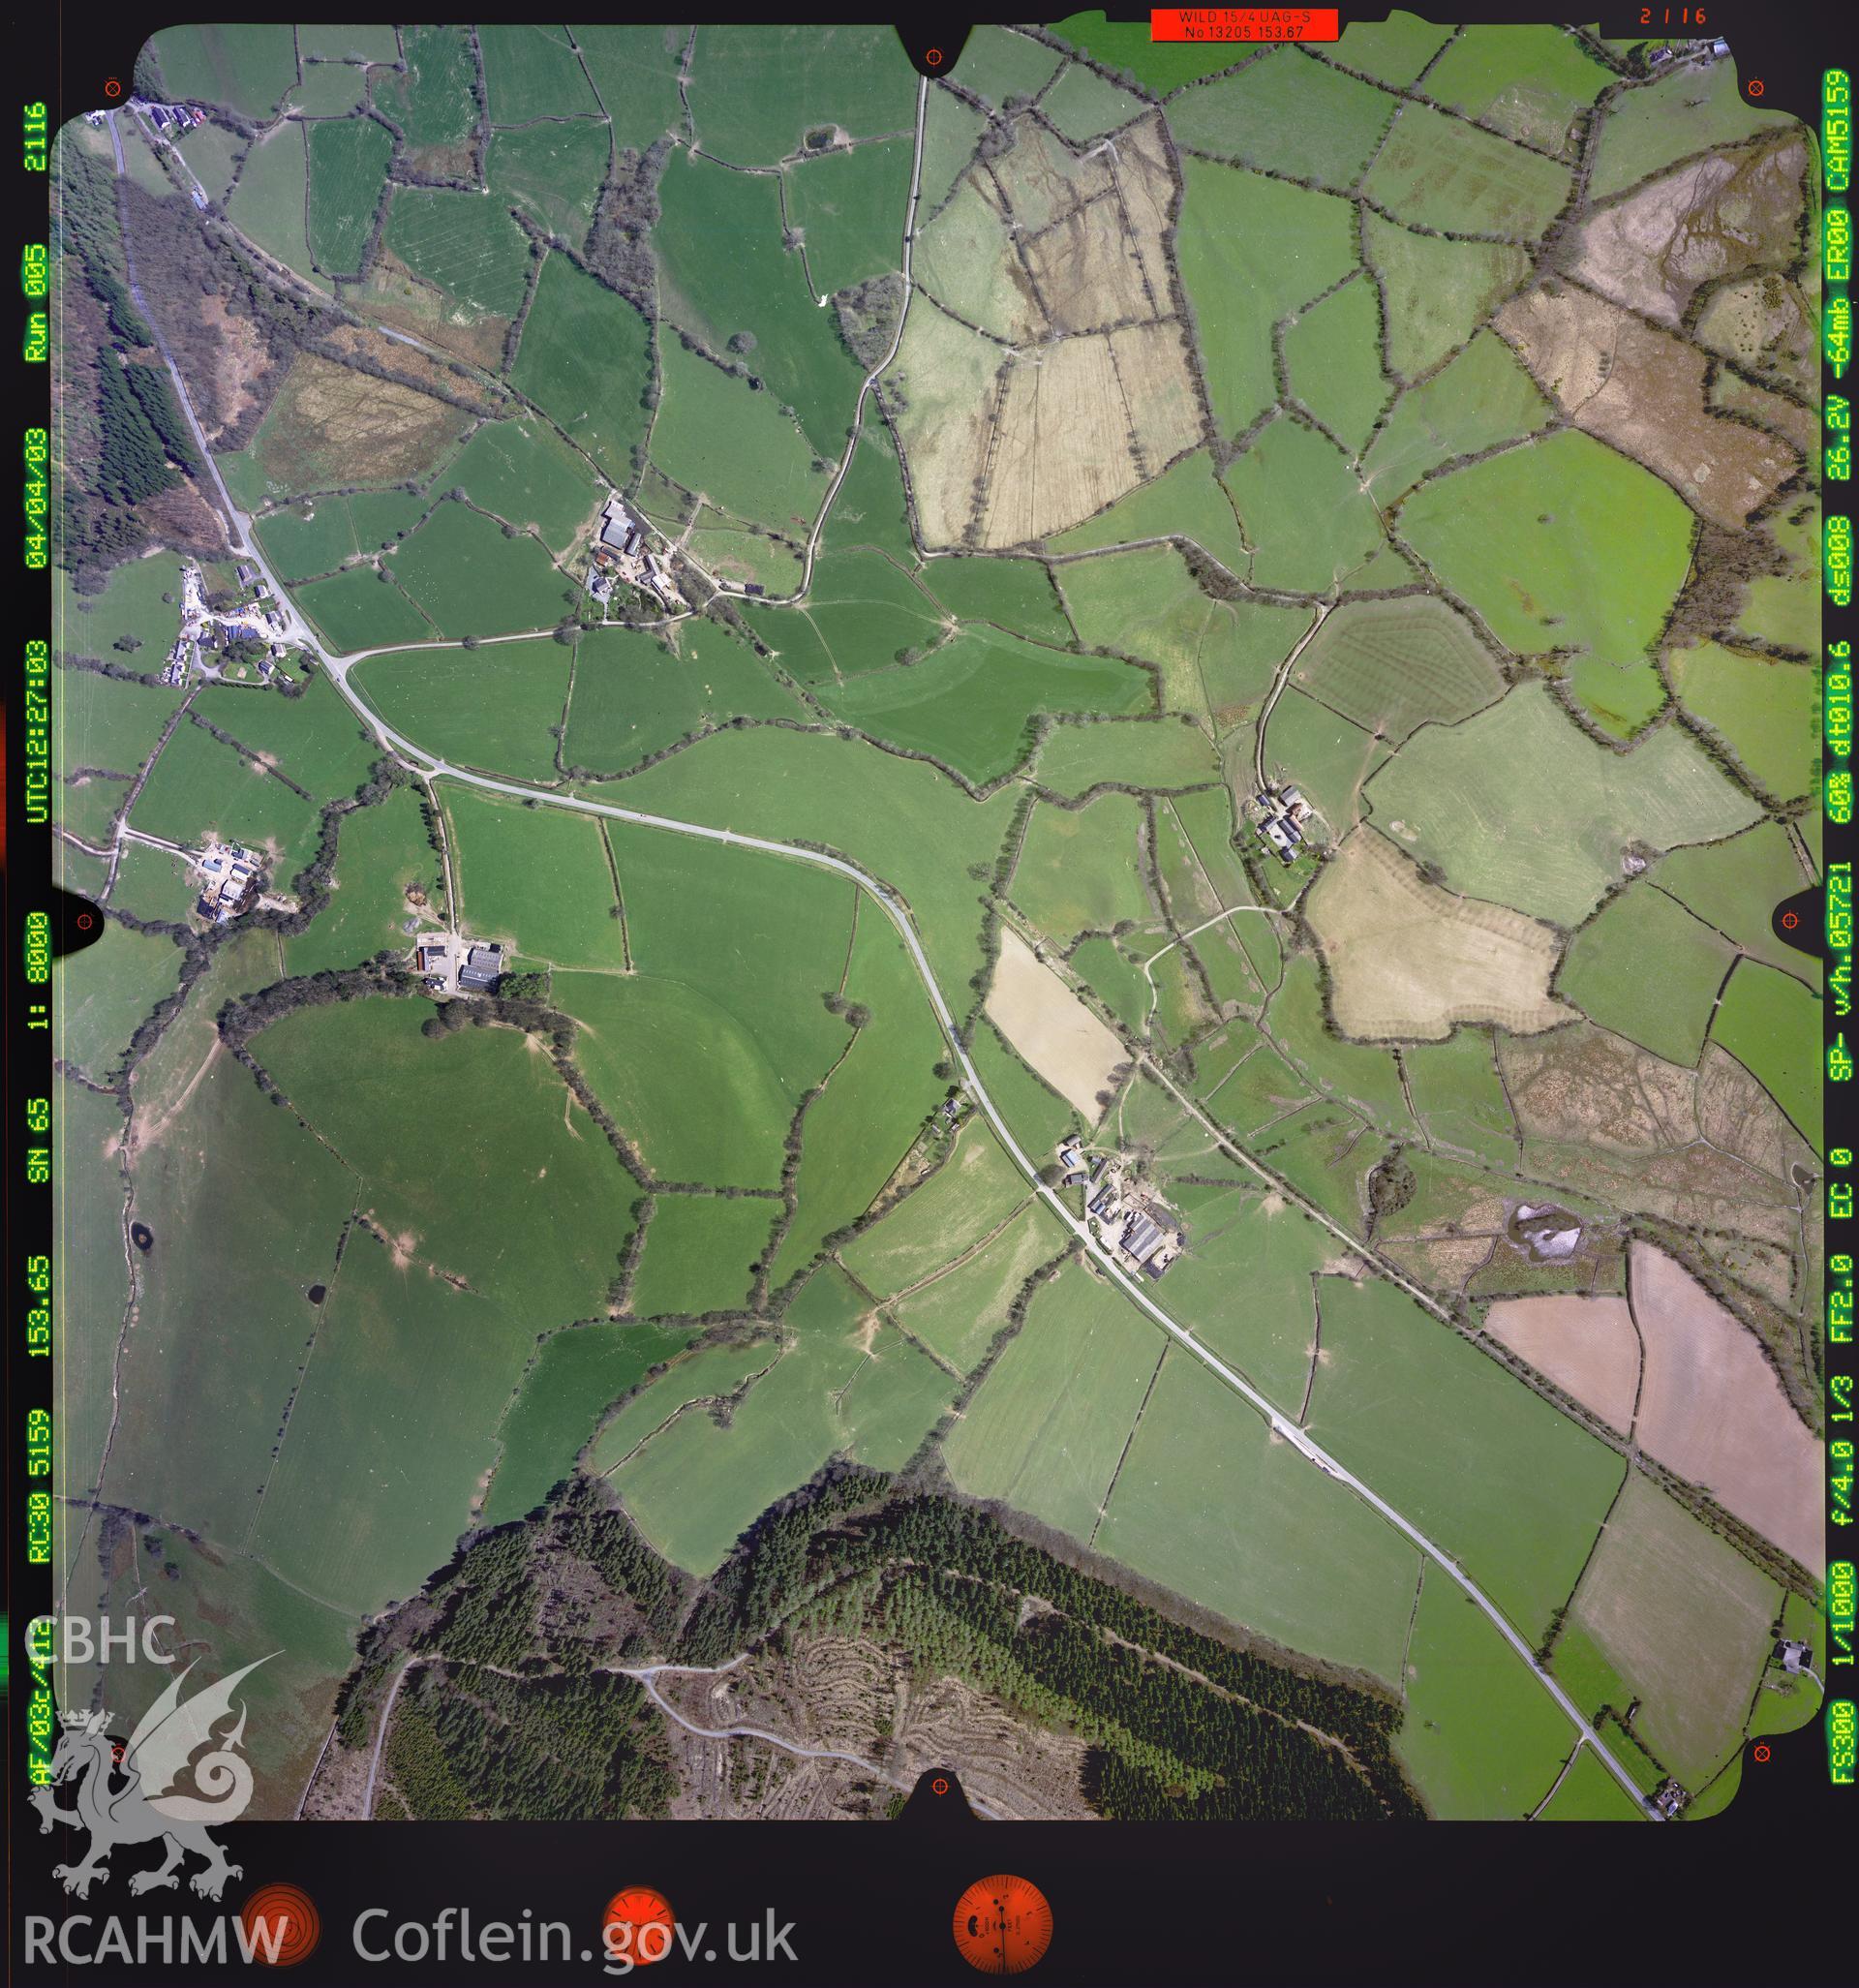 Digitized copy of a colour aerial photograph showing an area in Ceredigion, taken by Ordnance Survey, 2003.